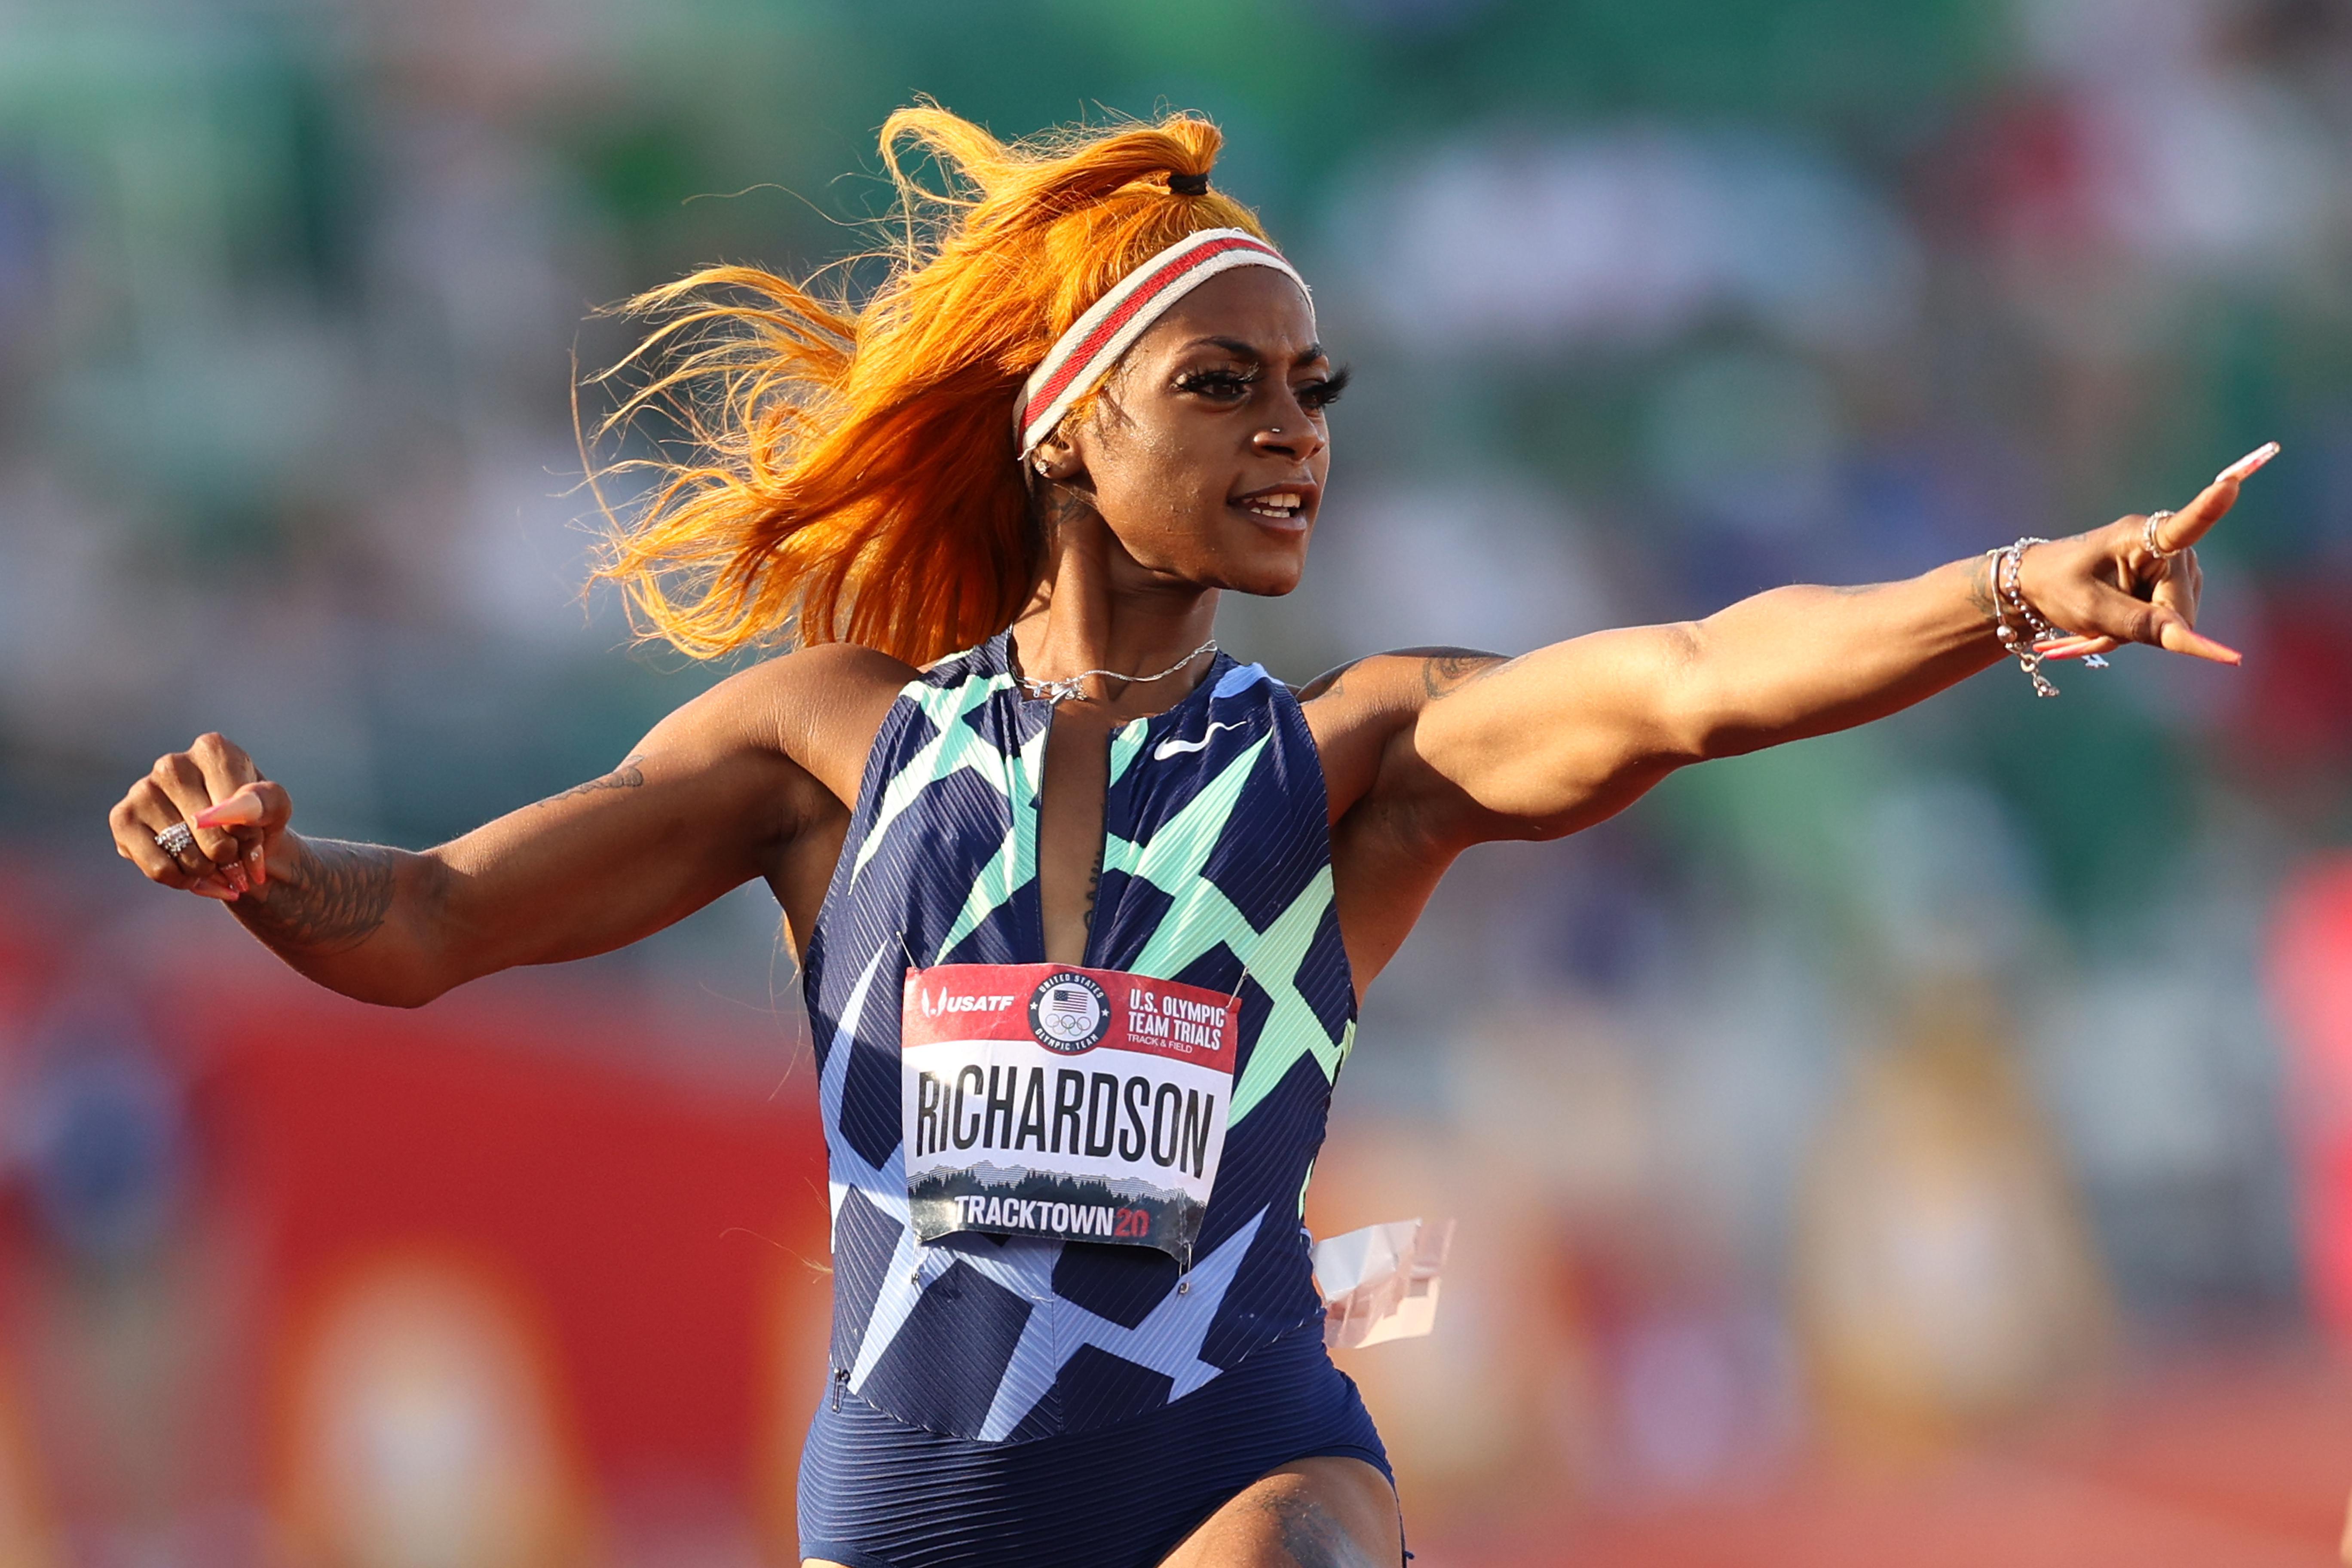 A woman with orange hair points in triumph at the Olympic trials.